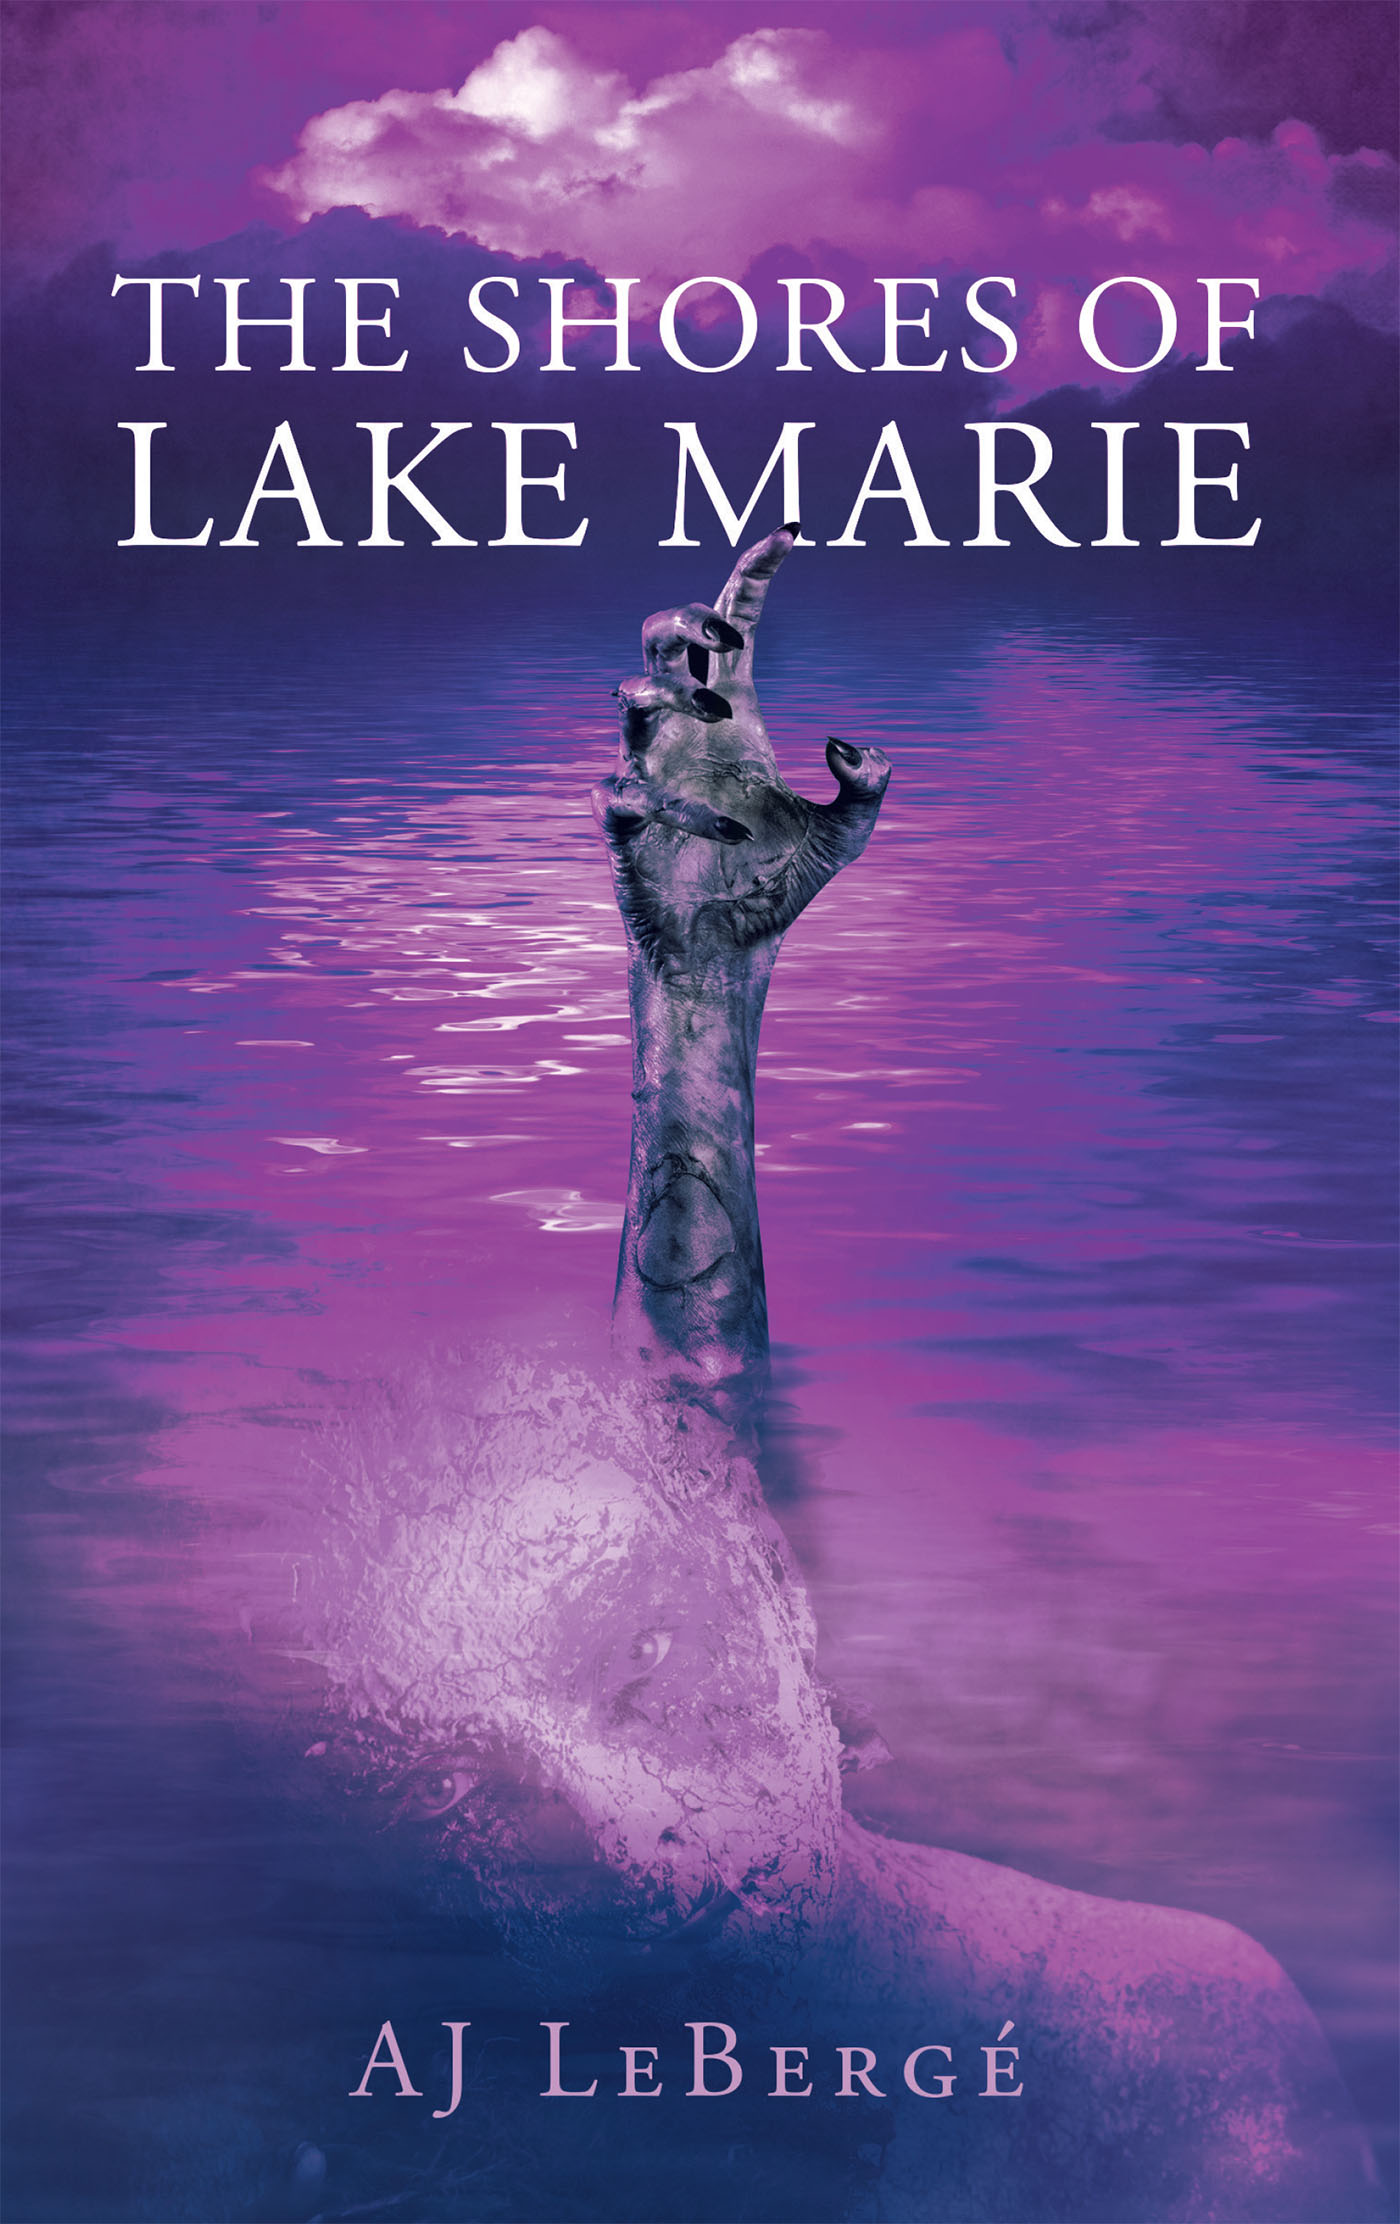 Author AJ LeBergé’s New Book, "The Shores of Lake Marie," is a Suspenseful Work About a Town Afflicted with a Vicious Streak of Evil and Horrendous Events